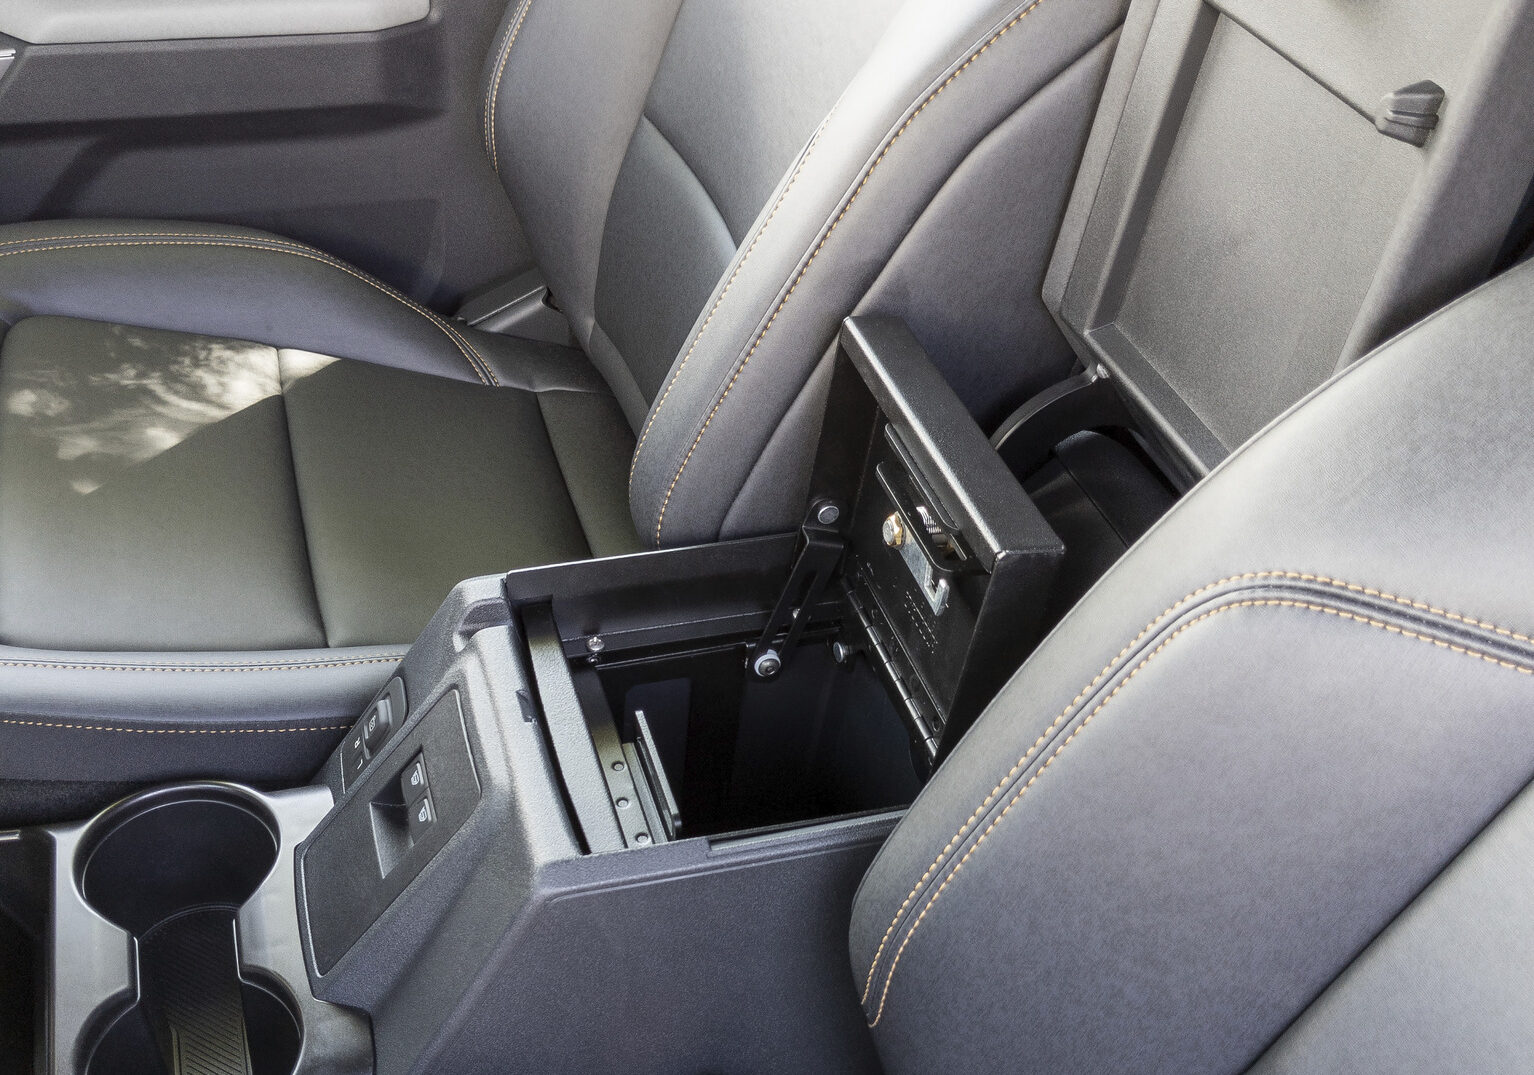 The center console opens to reveal a Tuffy center console safe in a Bronco.